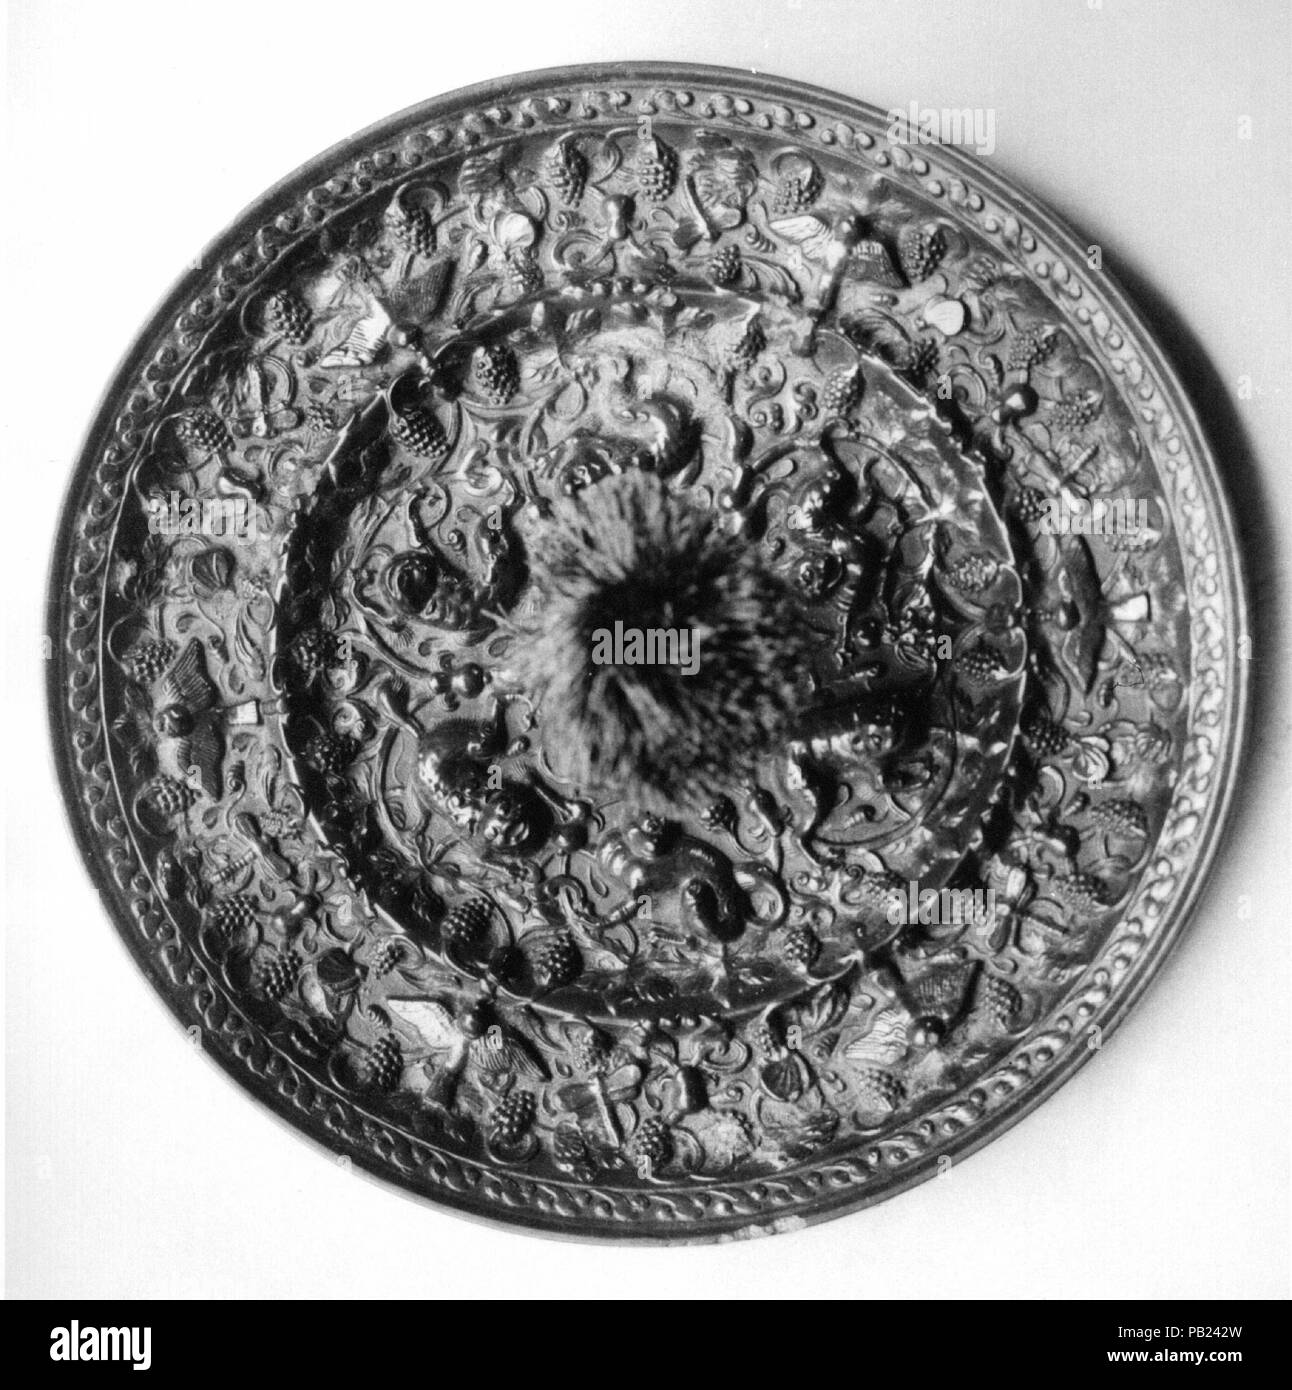 Mirror with Grapes and Fantastic Sea Animals. Culture: China. Dimensions: Diam. 6 3/4 in. (17.1 cm). Date: 8th century. Museum: Metropolitan Museum of Art, New York, USA. Stock Photo